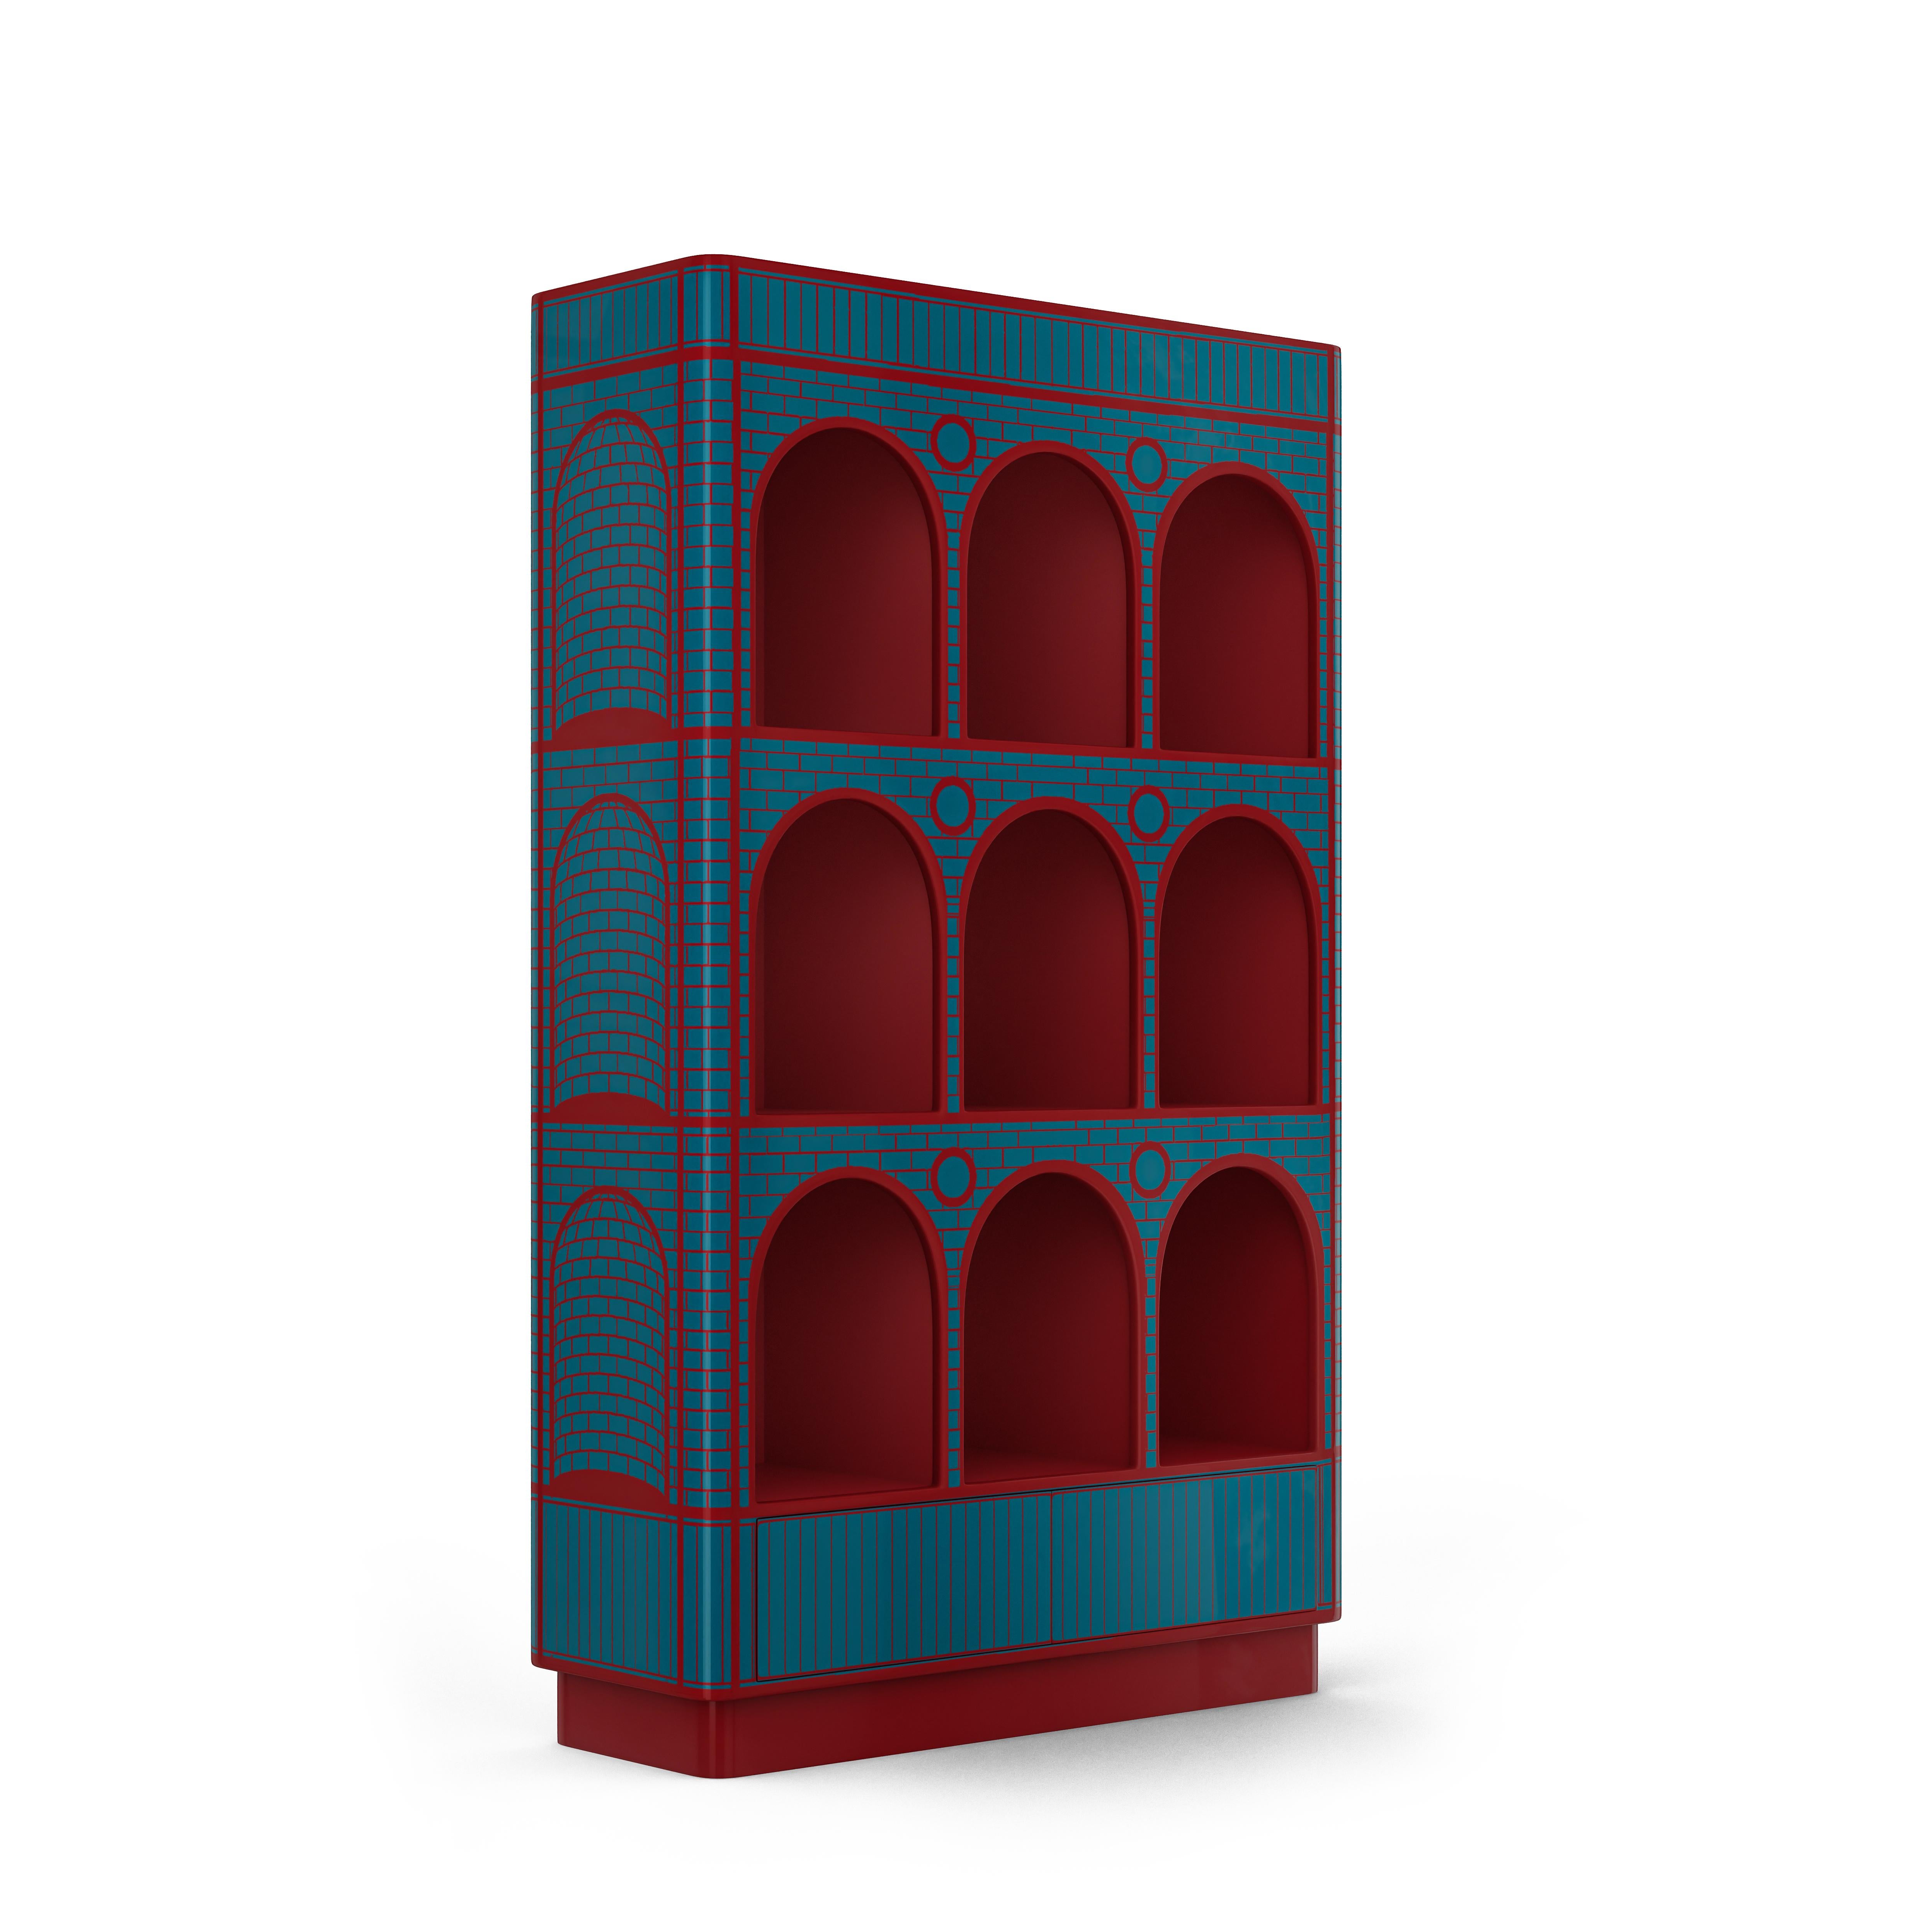 The Count berry blue and red showcase cabinet by Matteo Cibic is a tall impressive display or book cabinet.

As the name suggests, the Scarlet Splendour Gelato Collection brings you comforting familiarity and joyful adventure through each